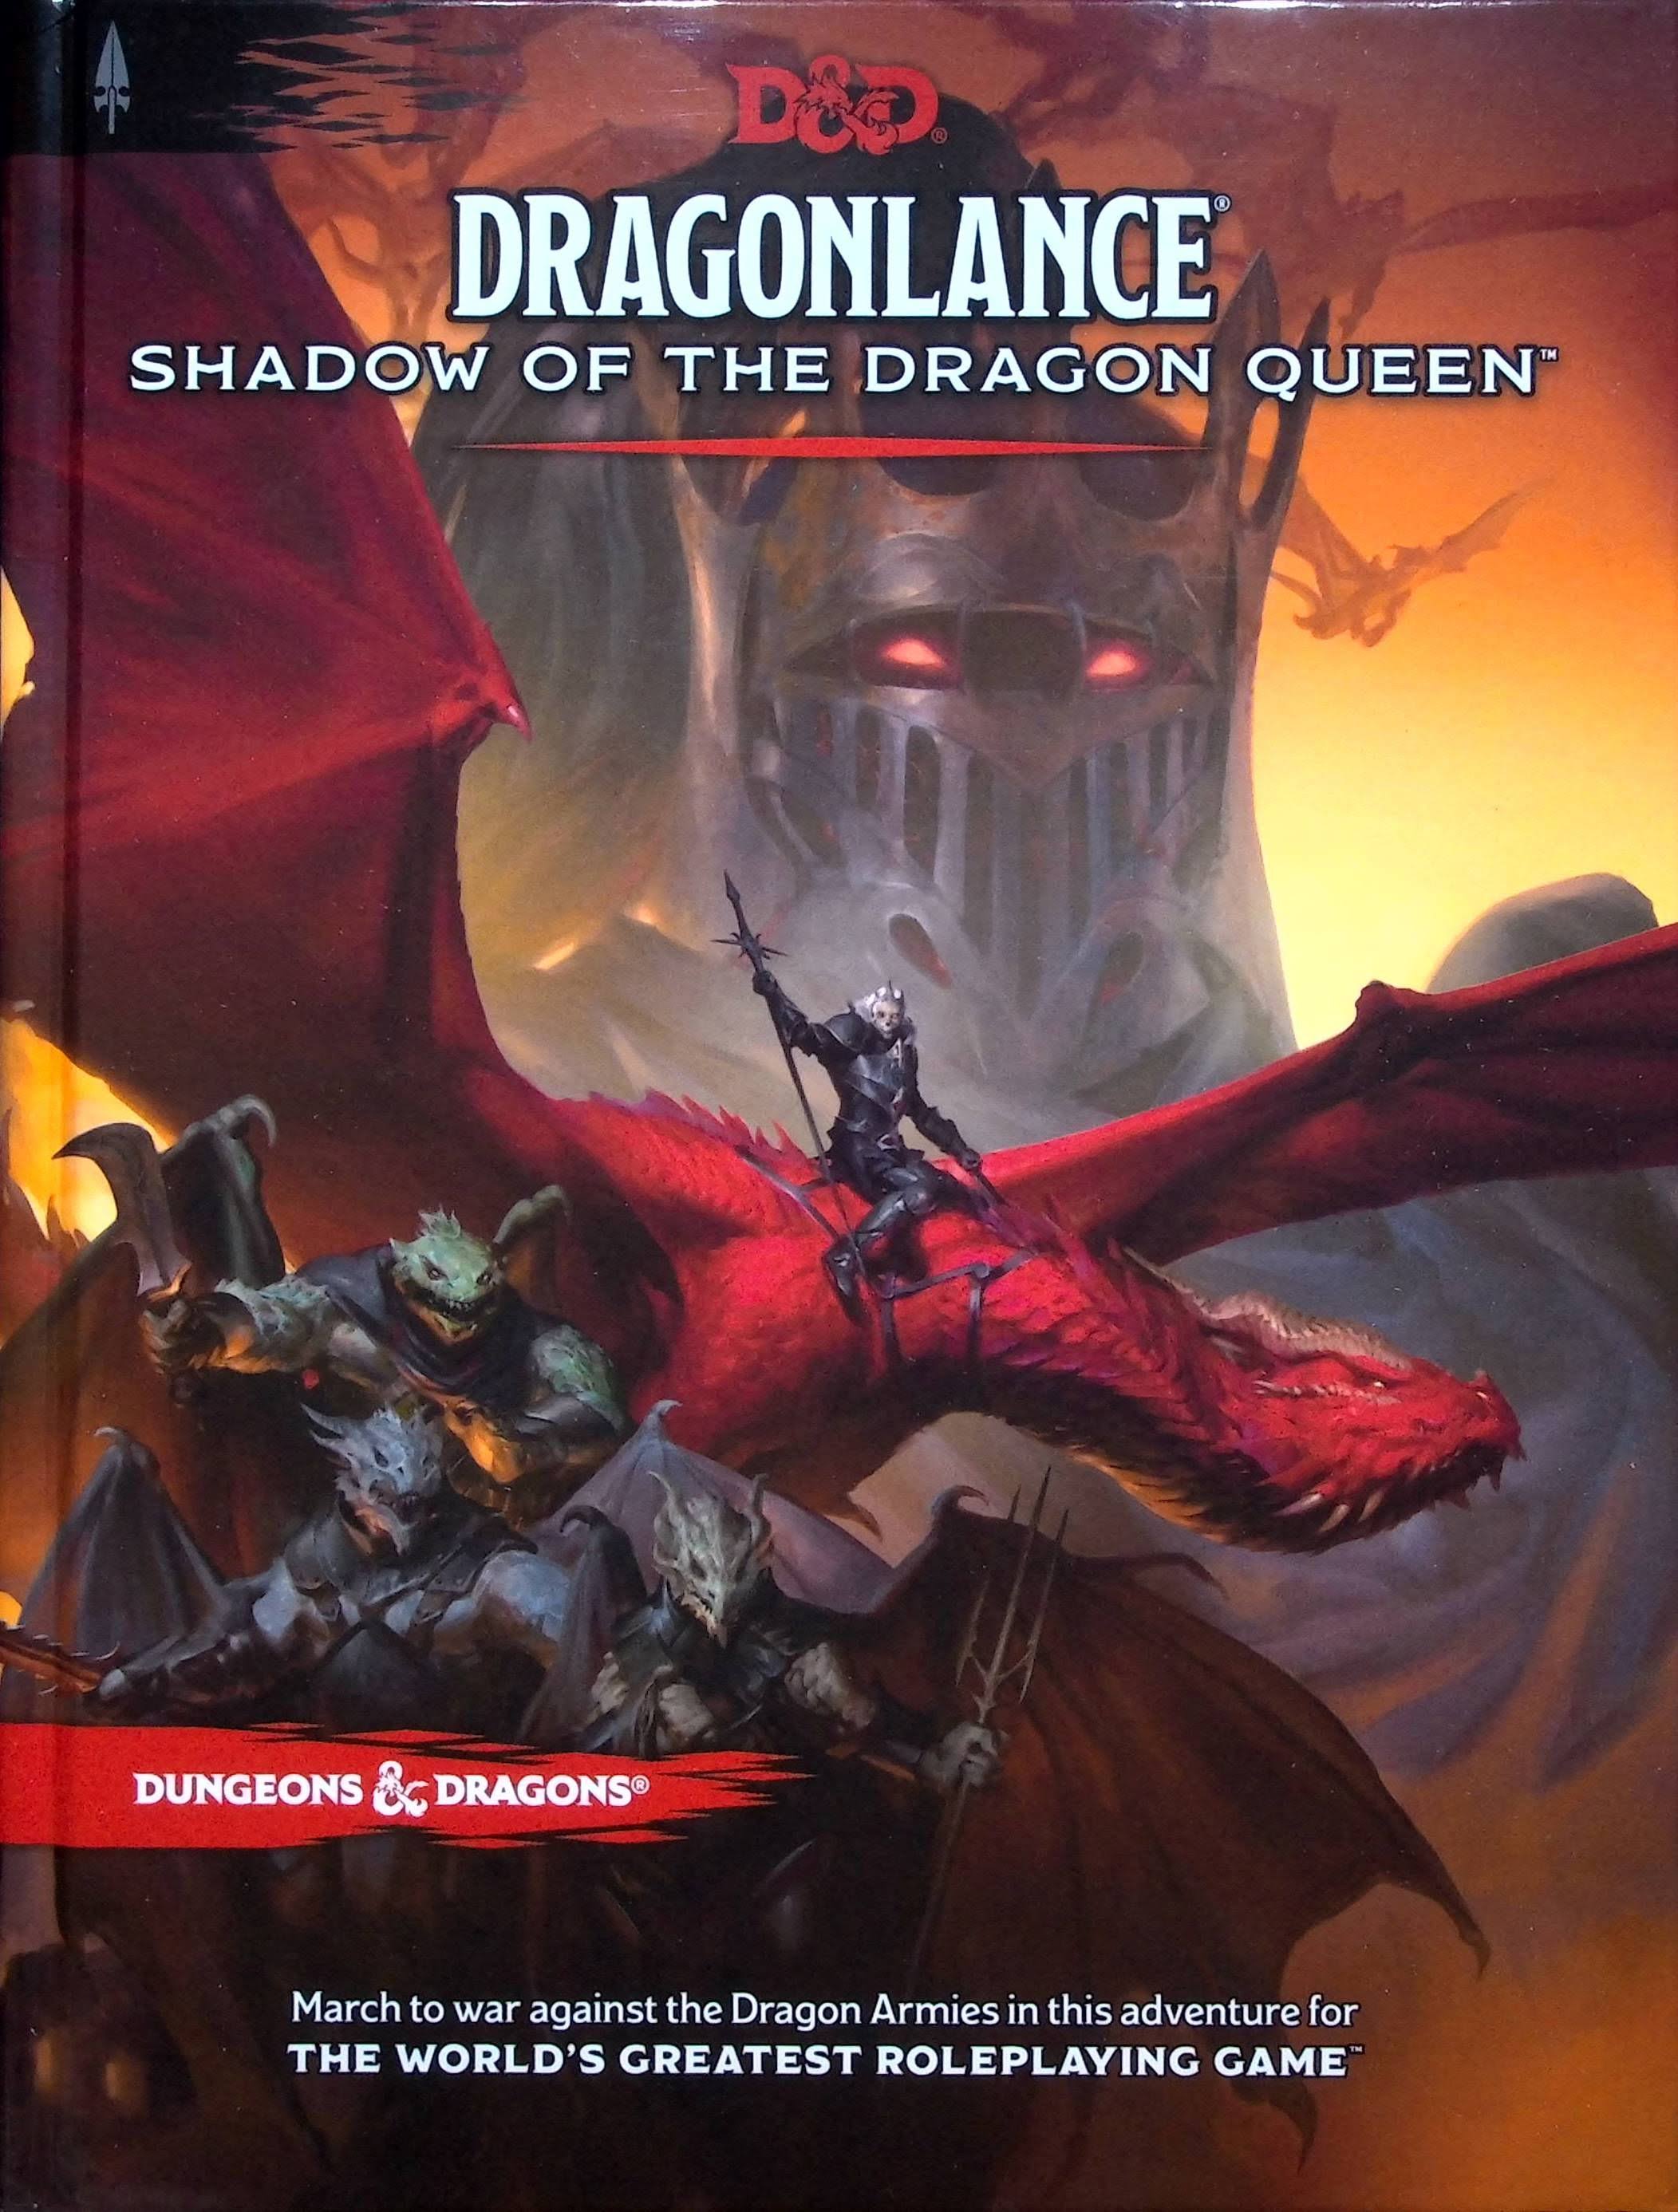 Dragonlance: Shadow of the Dragon Queen (Dungeons & Dragons Adventure Book) [Book]